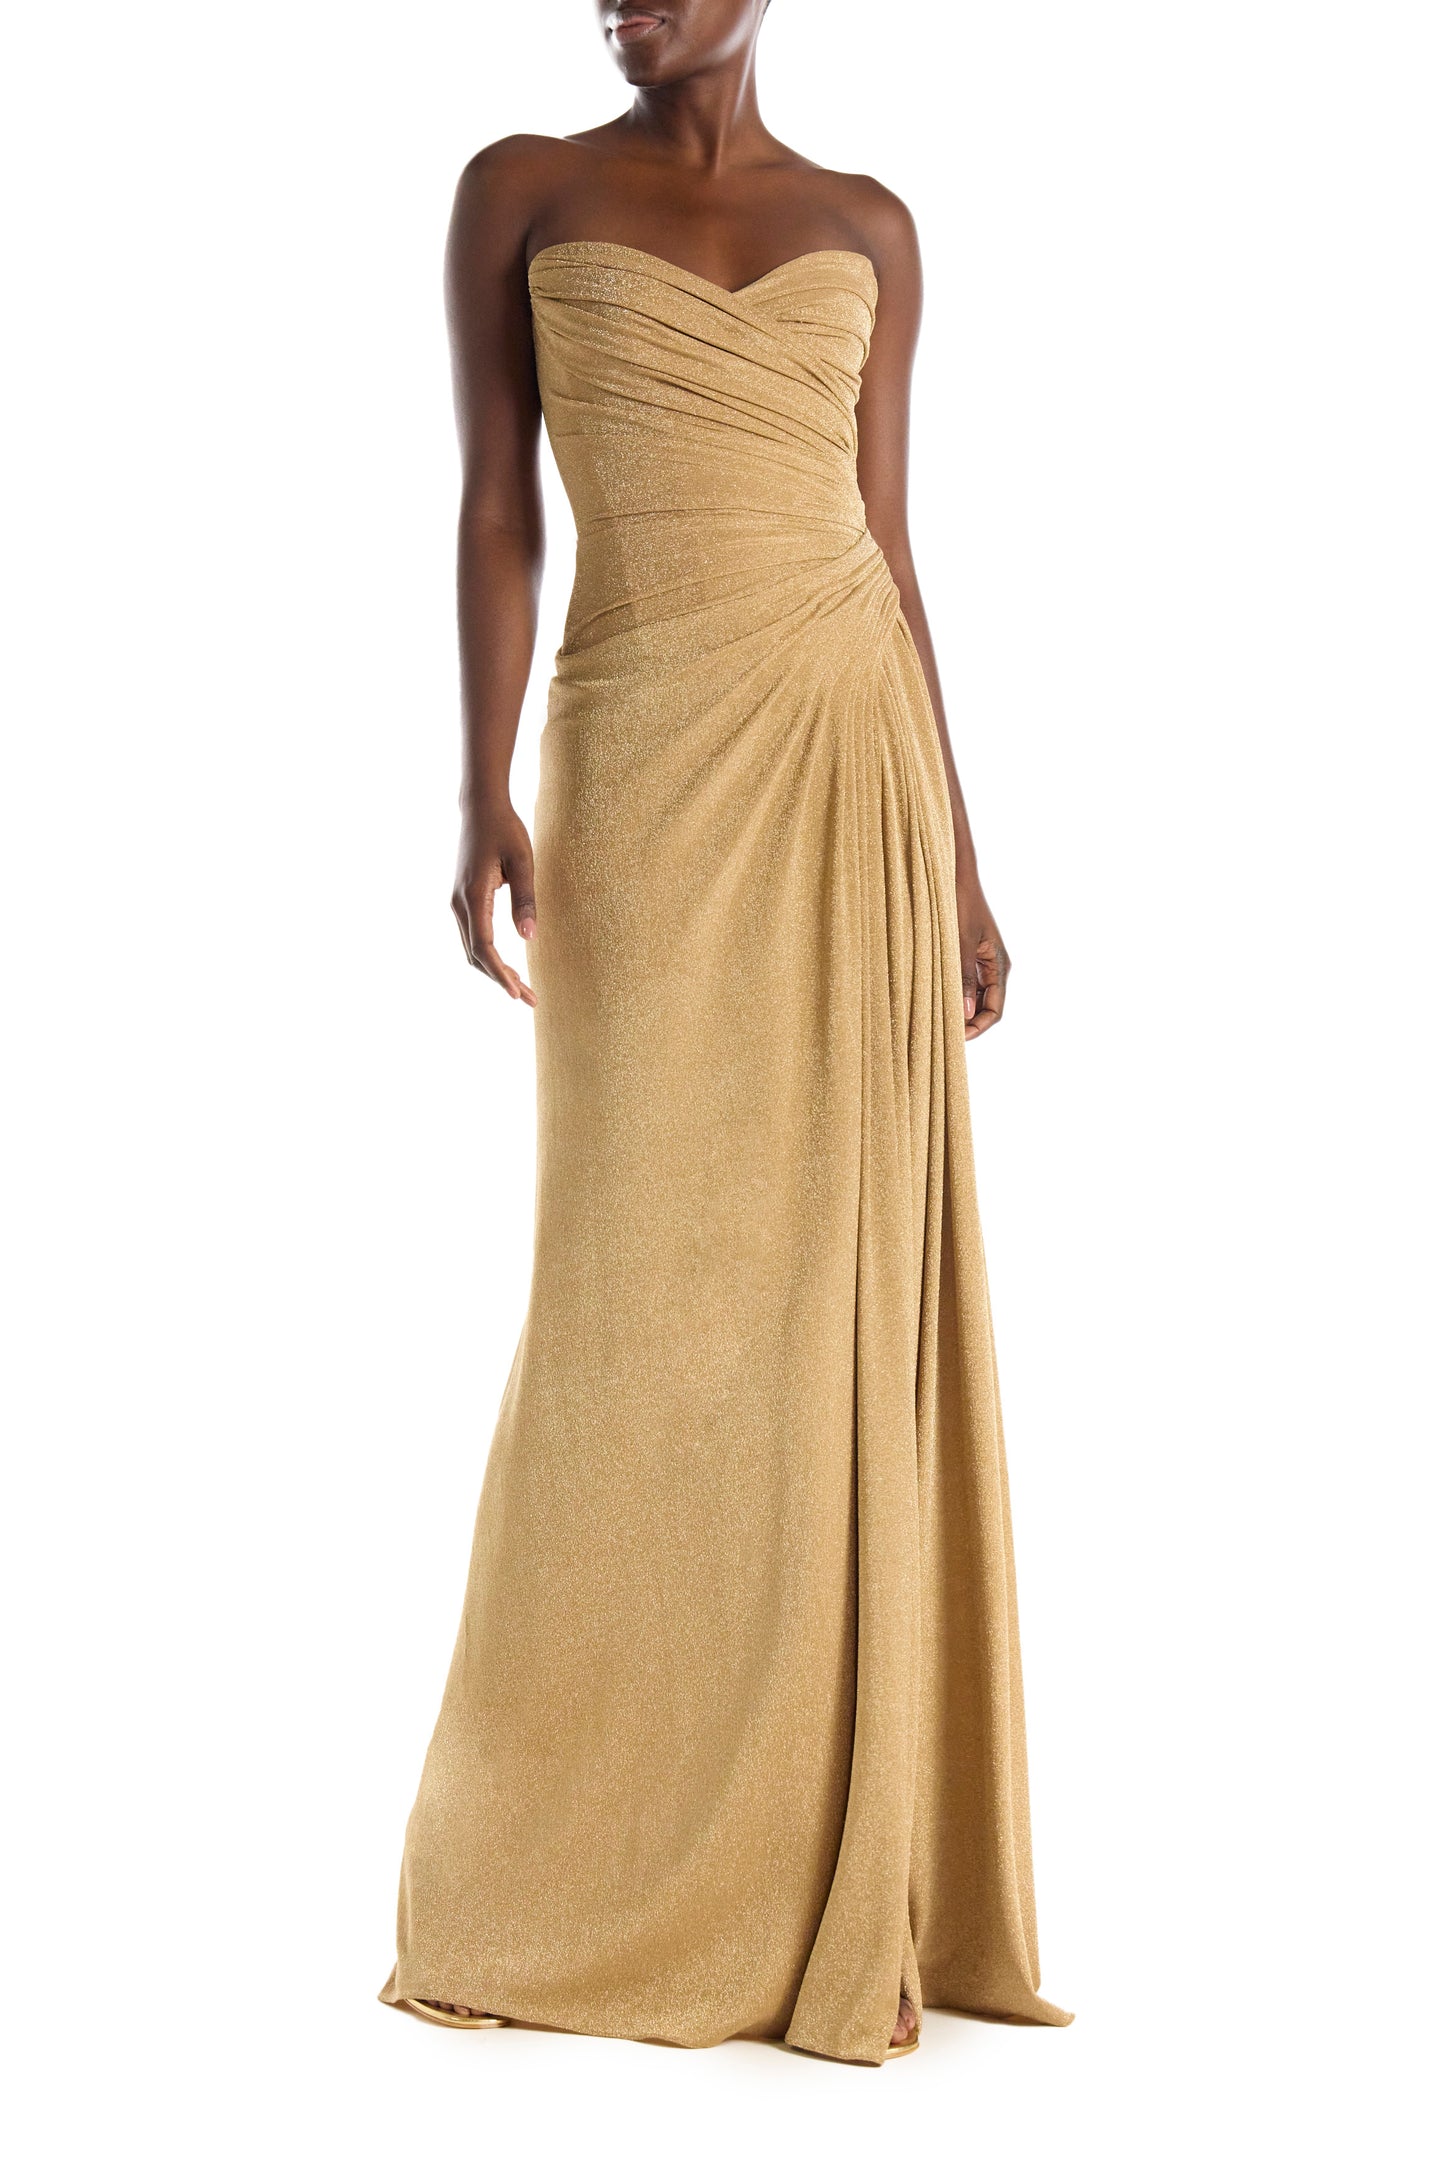 Monique Lhuillier sweetheart neckline strapless gold dress in antique gold glitter knit fabric with high slit.